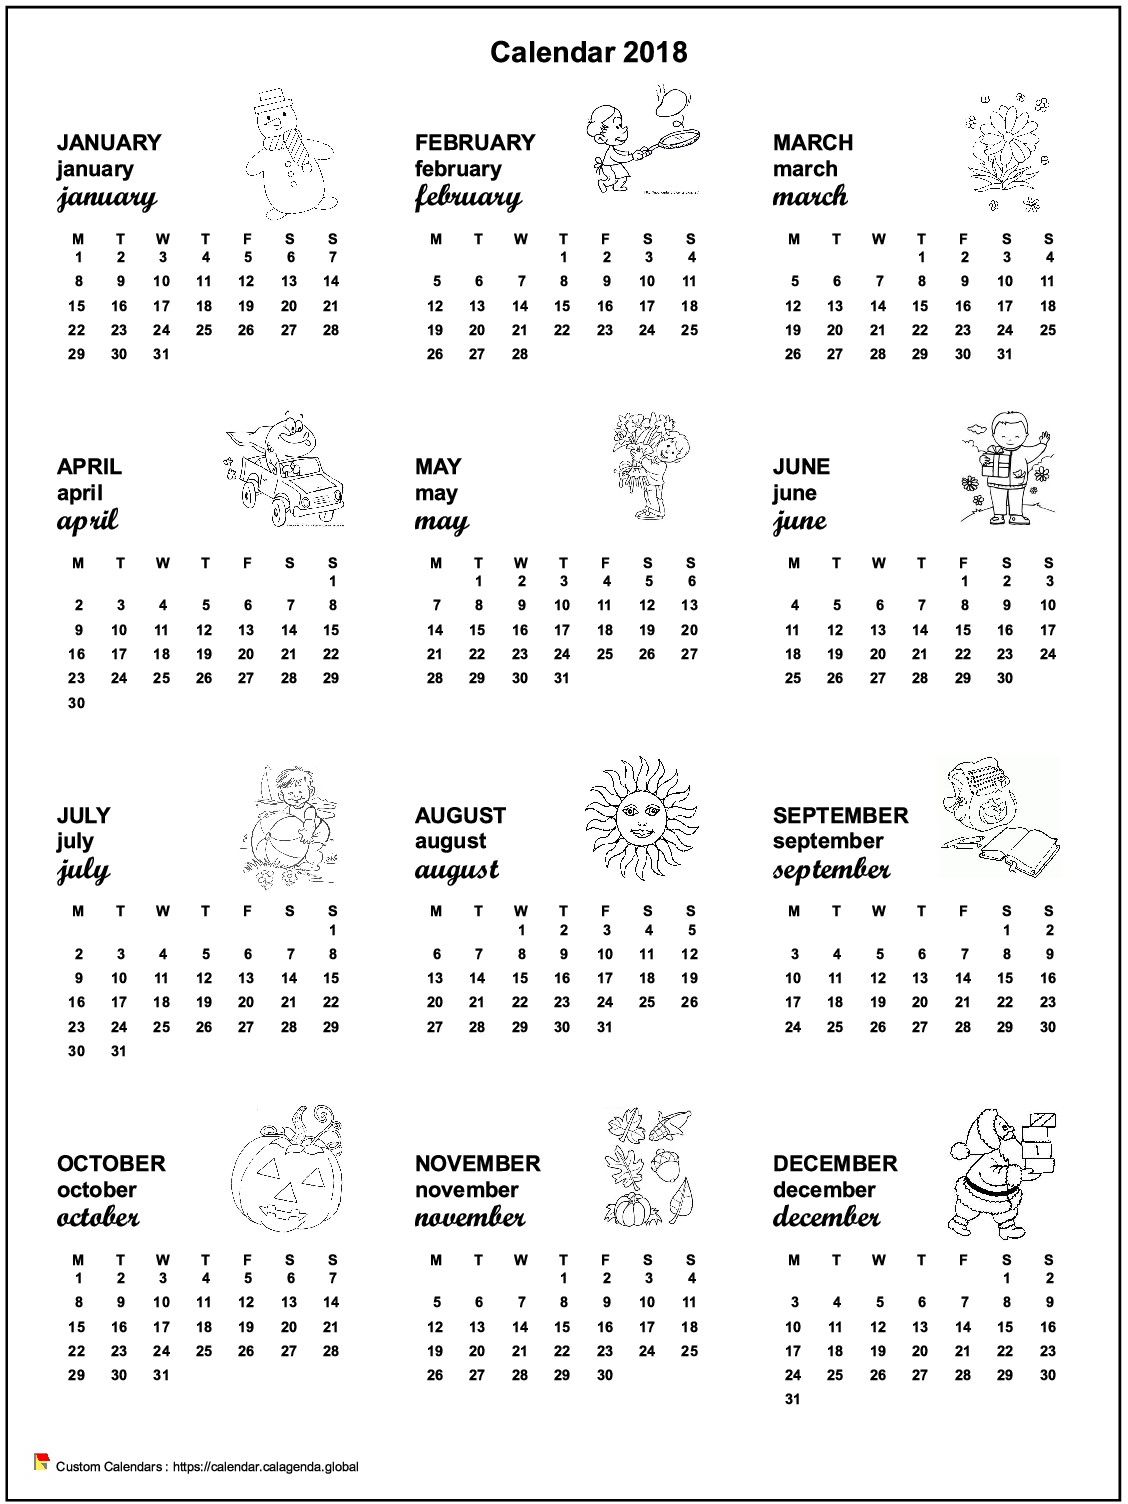 Calendar 2038 annual maternal and primary school